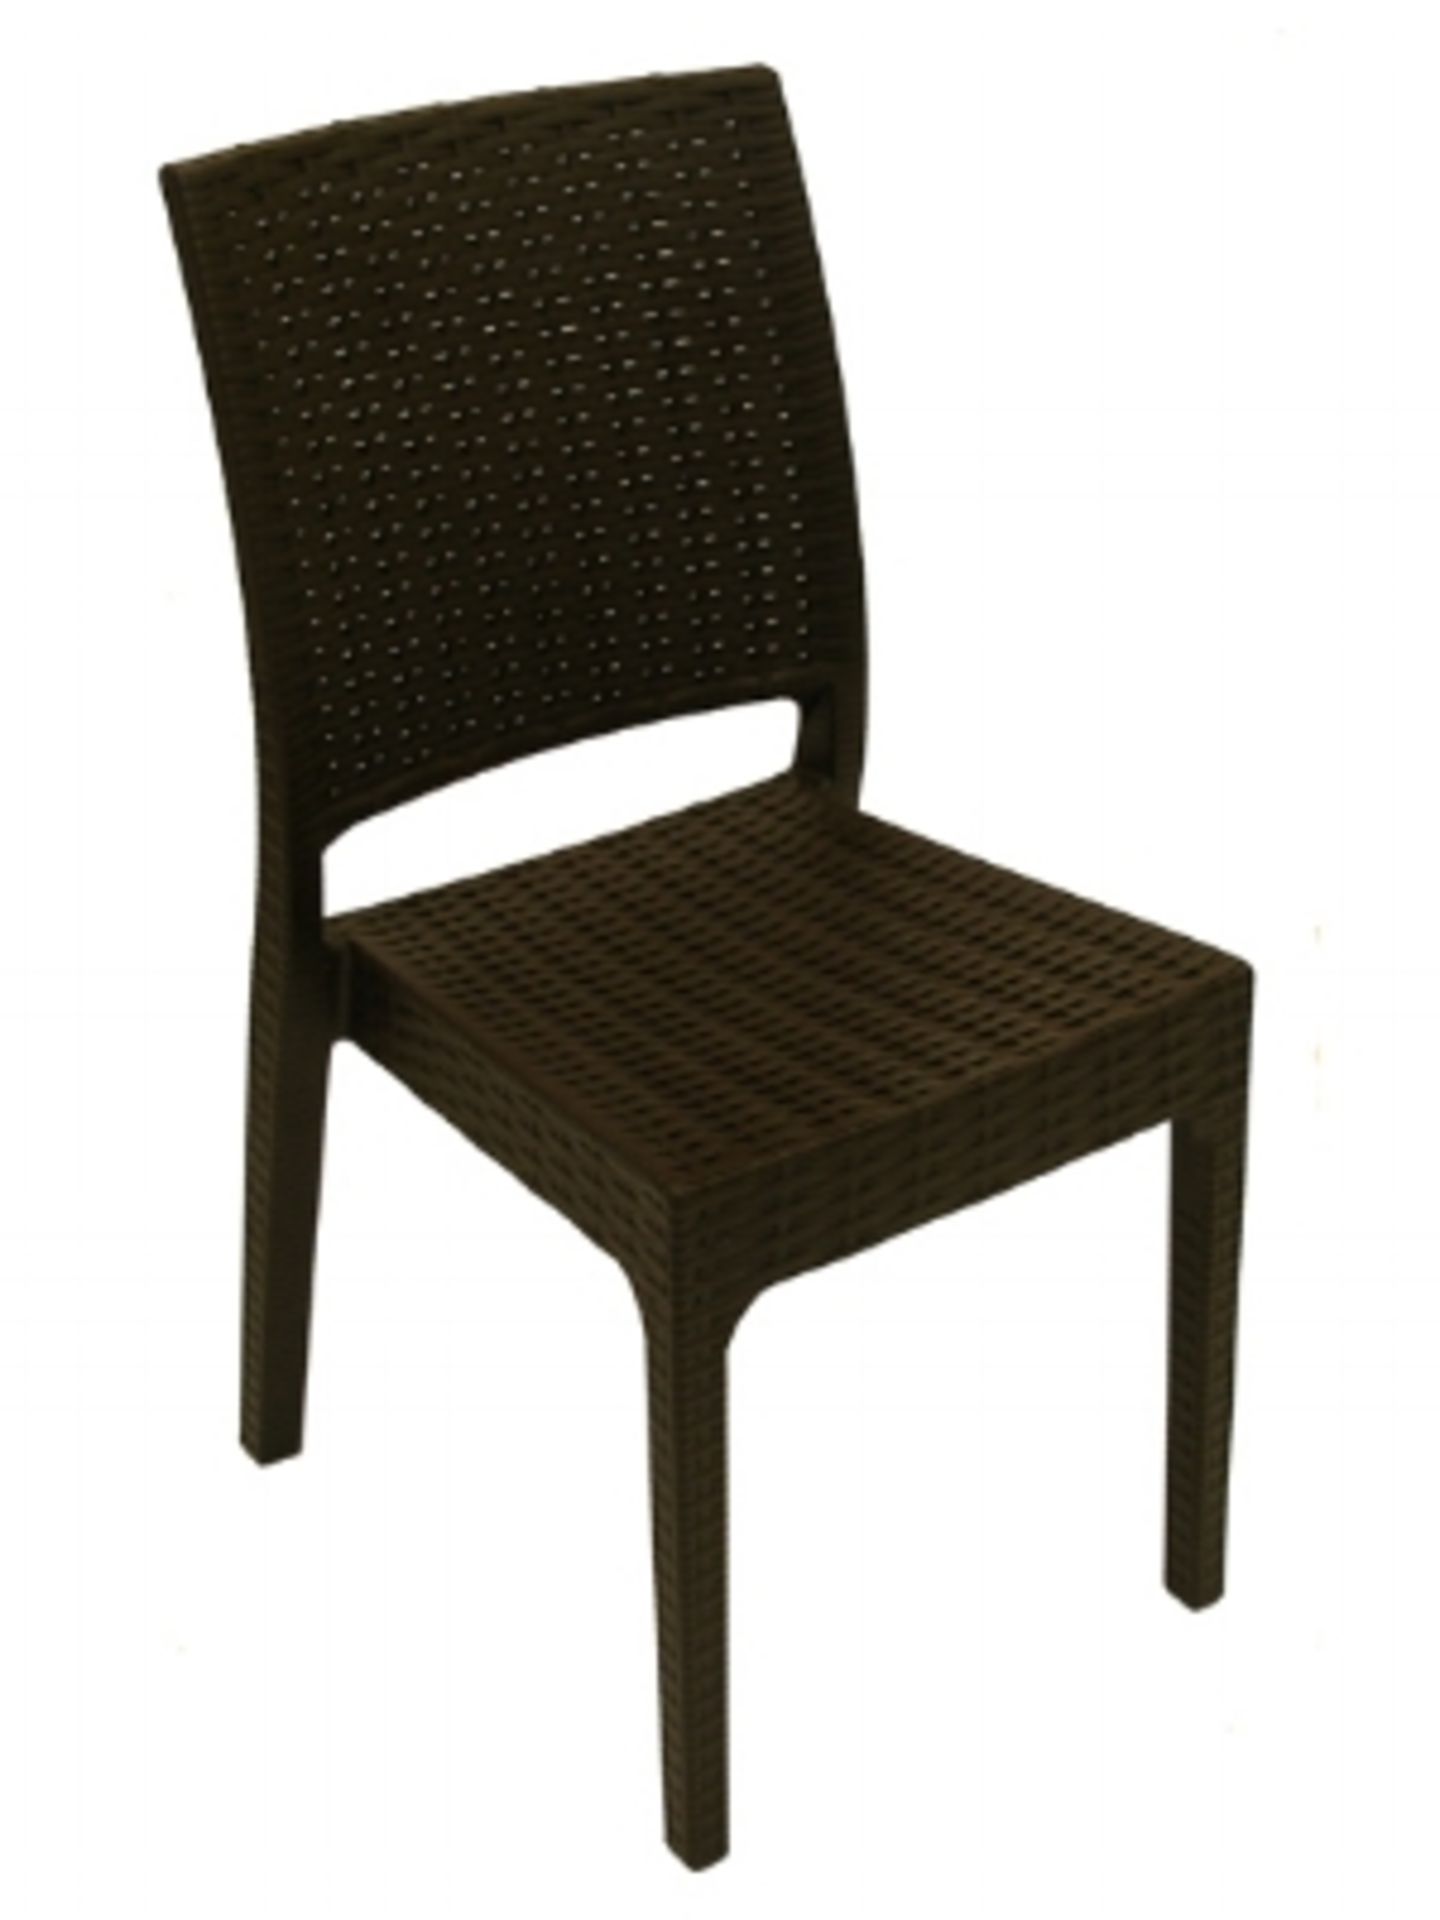 Florida Side Chair - Brown. 1 box of 4, plus 2 additional, 6 total